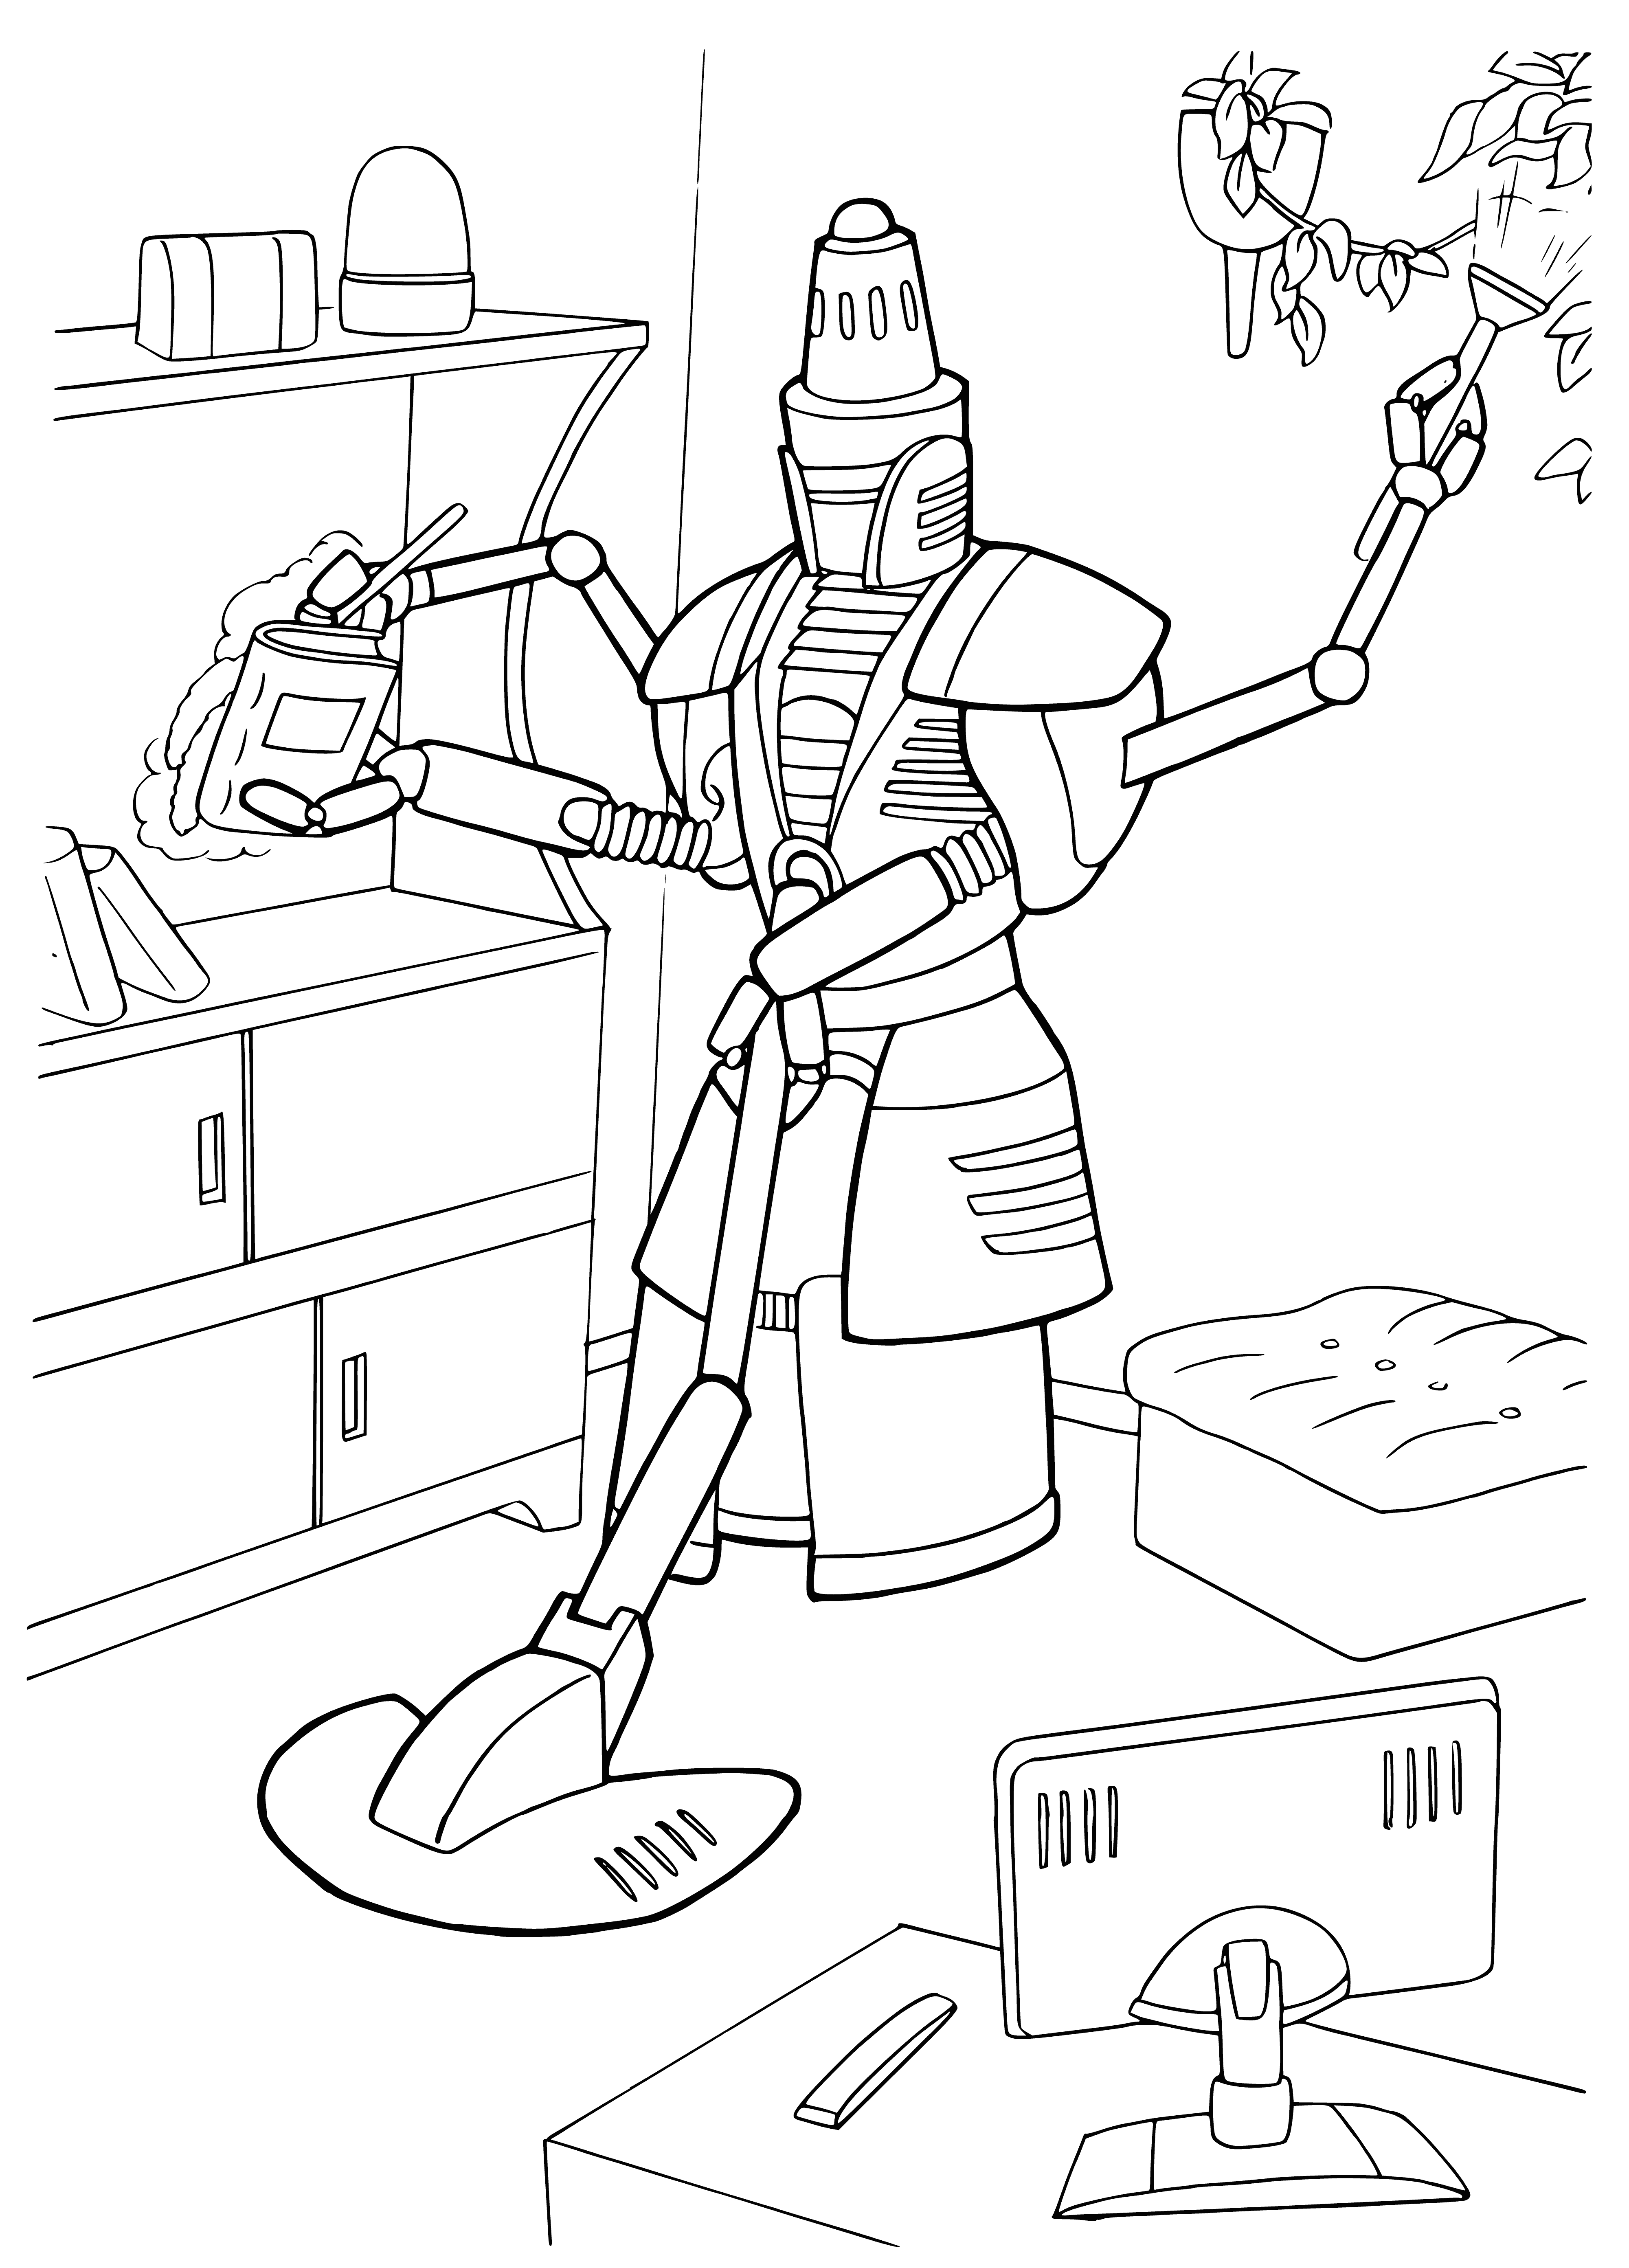 House cleaning robot coloring page